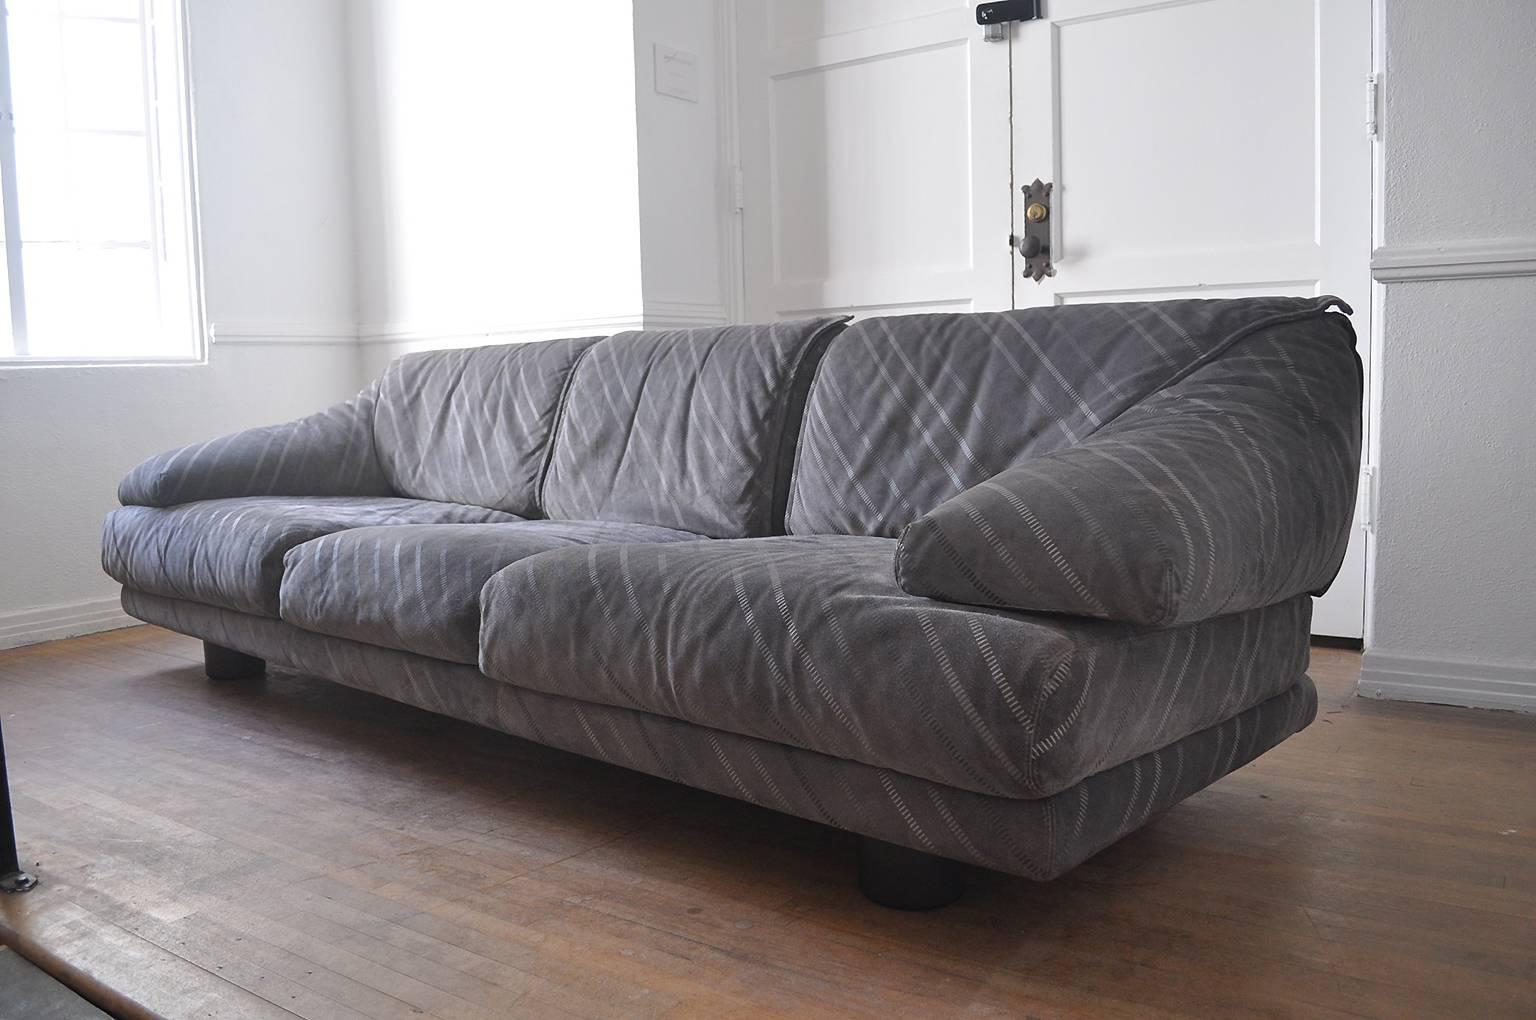 Saporiti Italia three-seat sofa in grey suede and black iconic cylindrical legs. Original manufacture labels attached.